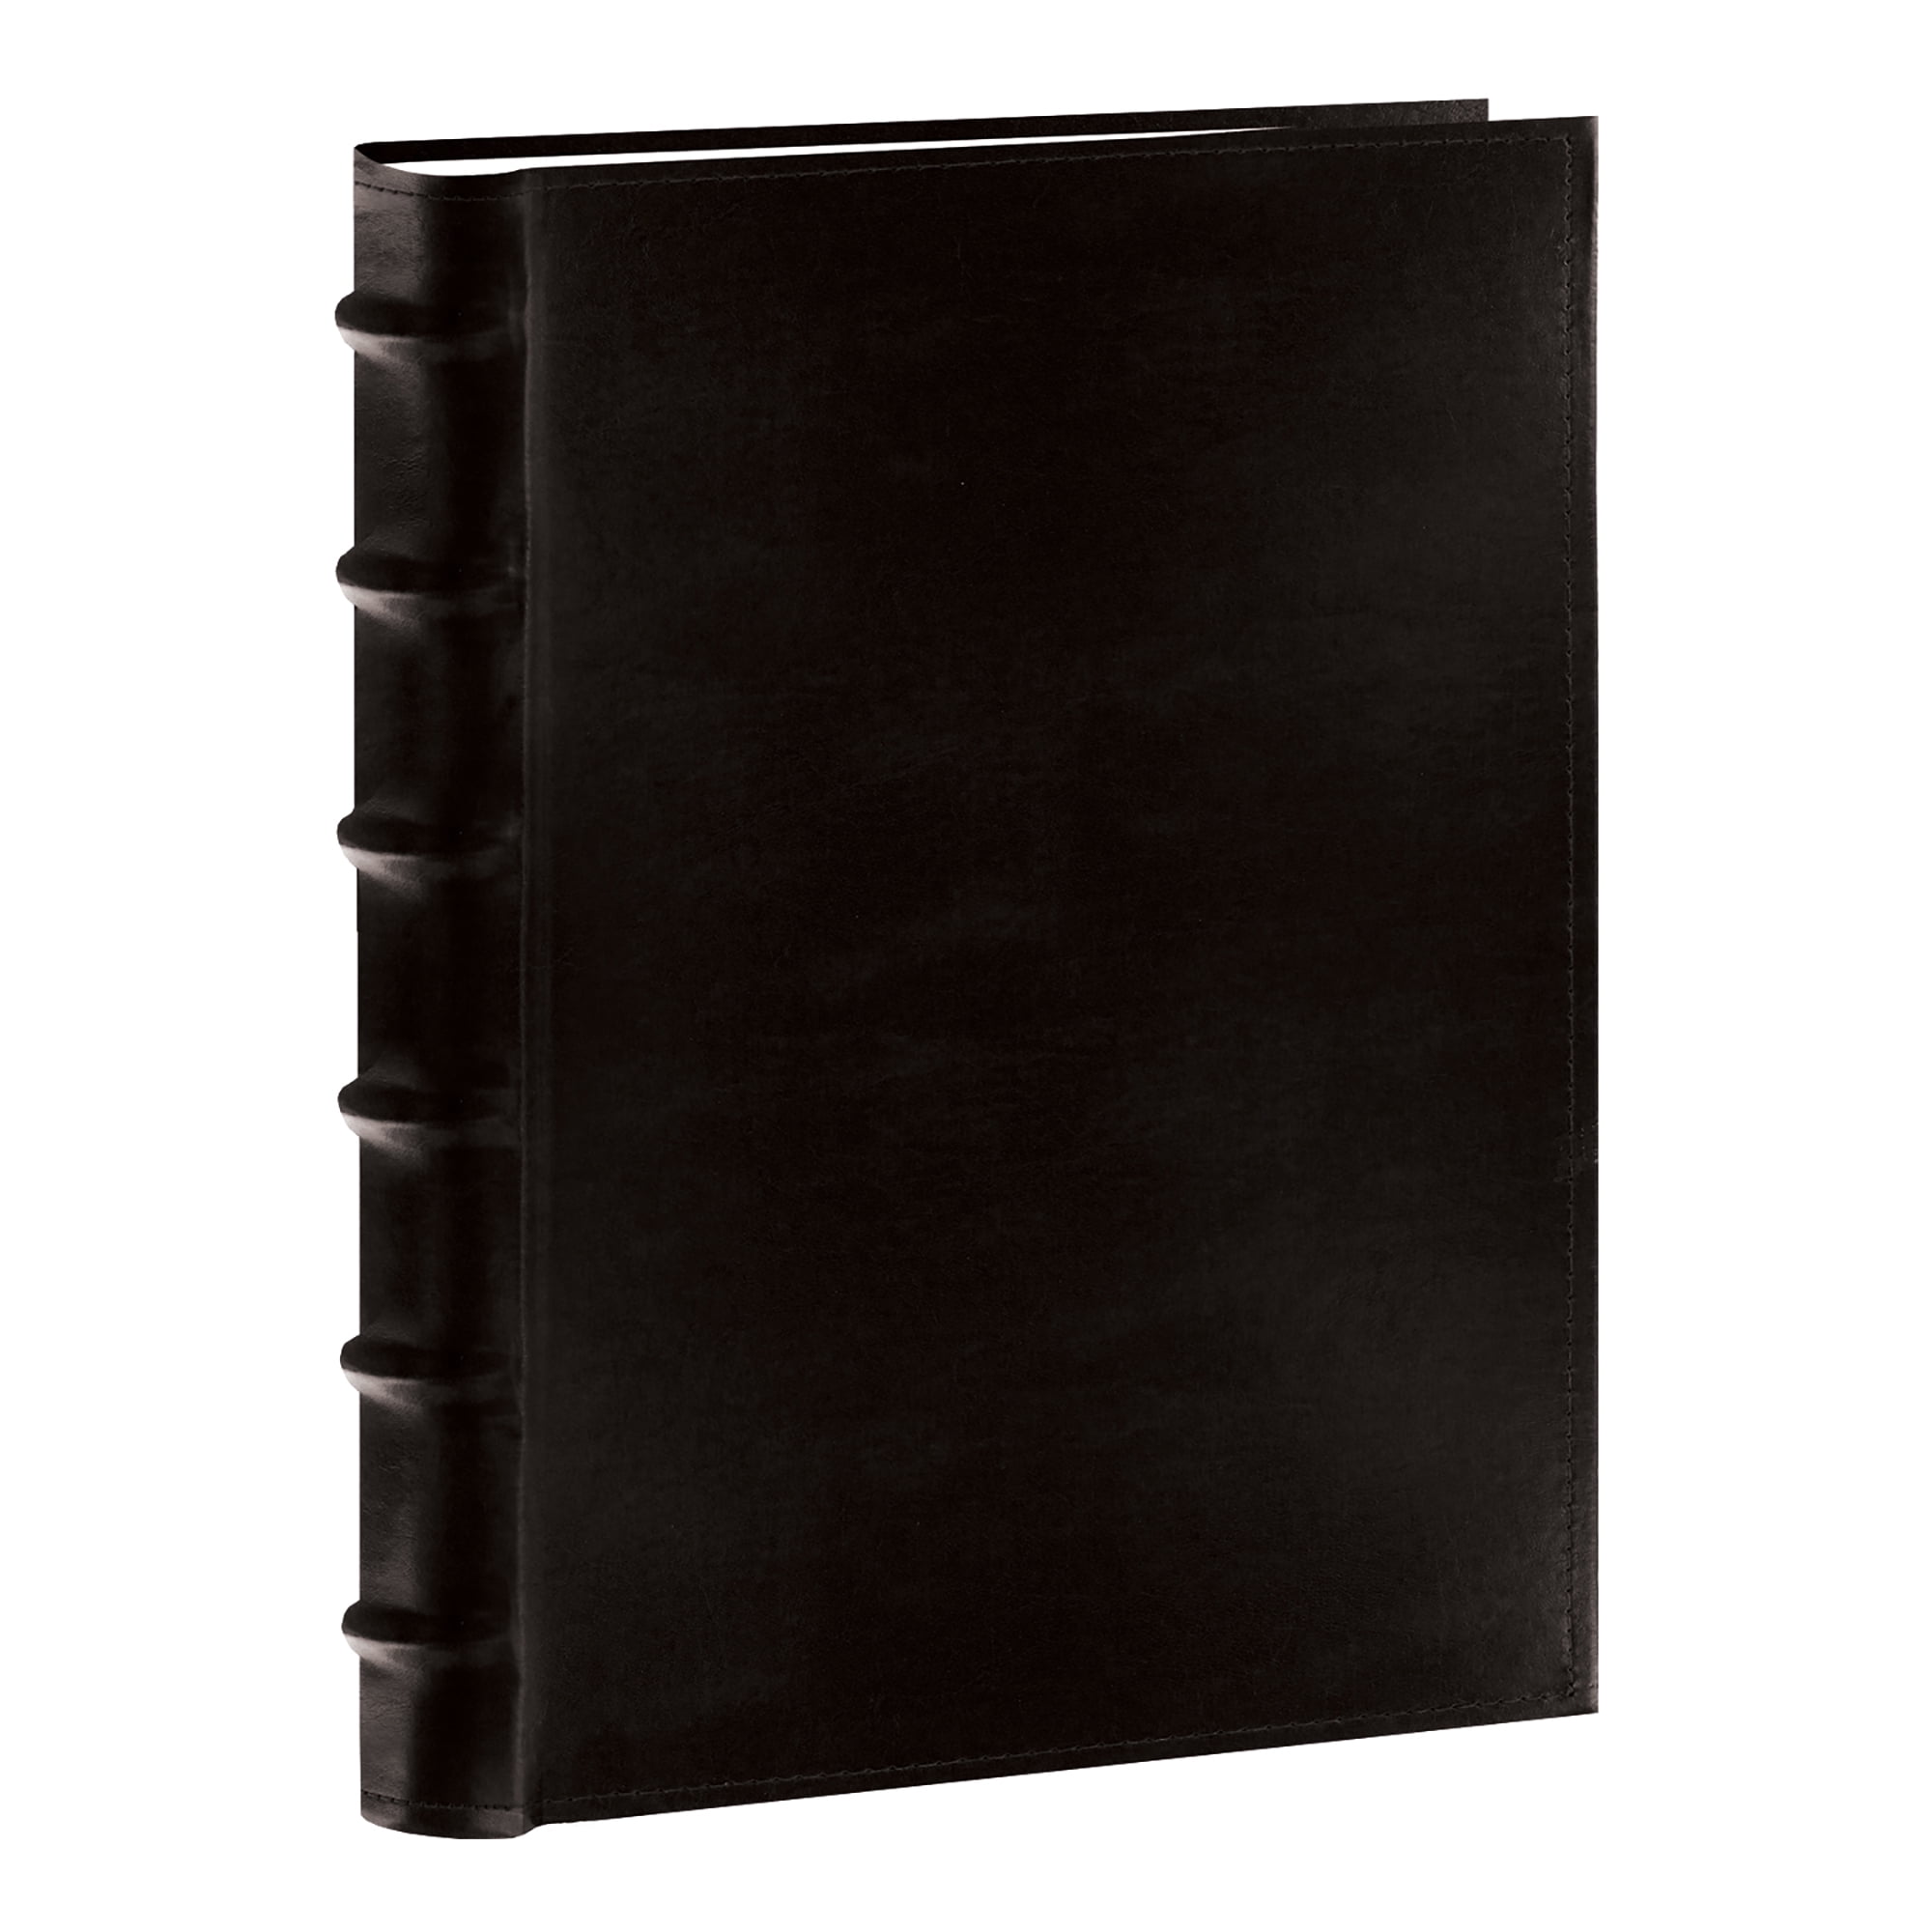 MSTONAL 4x6 Photo Albums, Linen Cover Photo Album Holds 300 Pockets, Black Picture Albums for 4x6 Photos, Slip-In Photo Books for Family Valentine